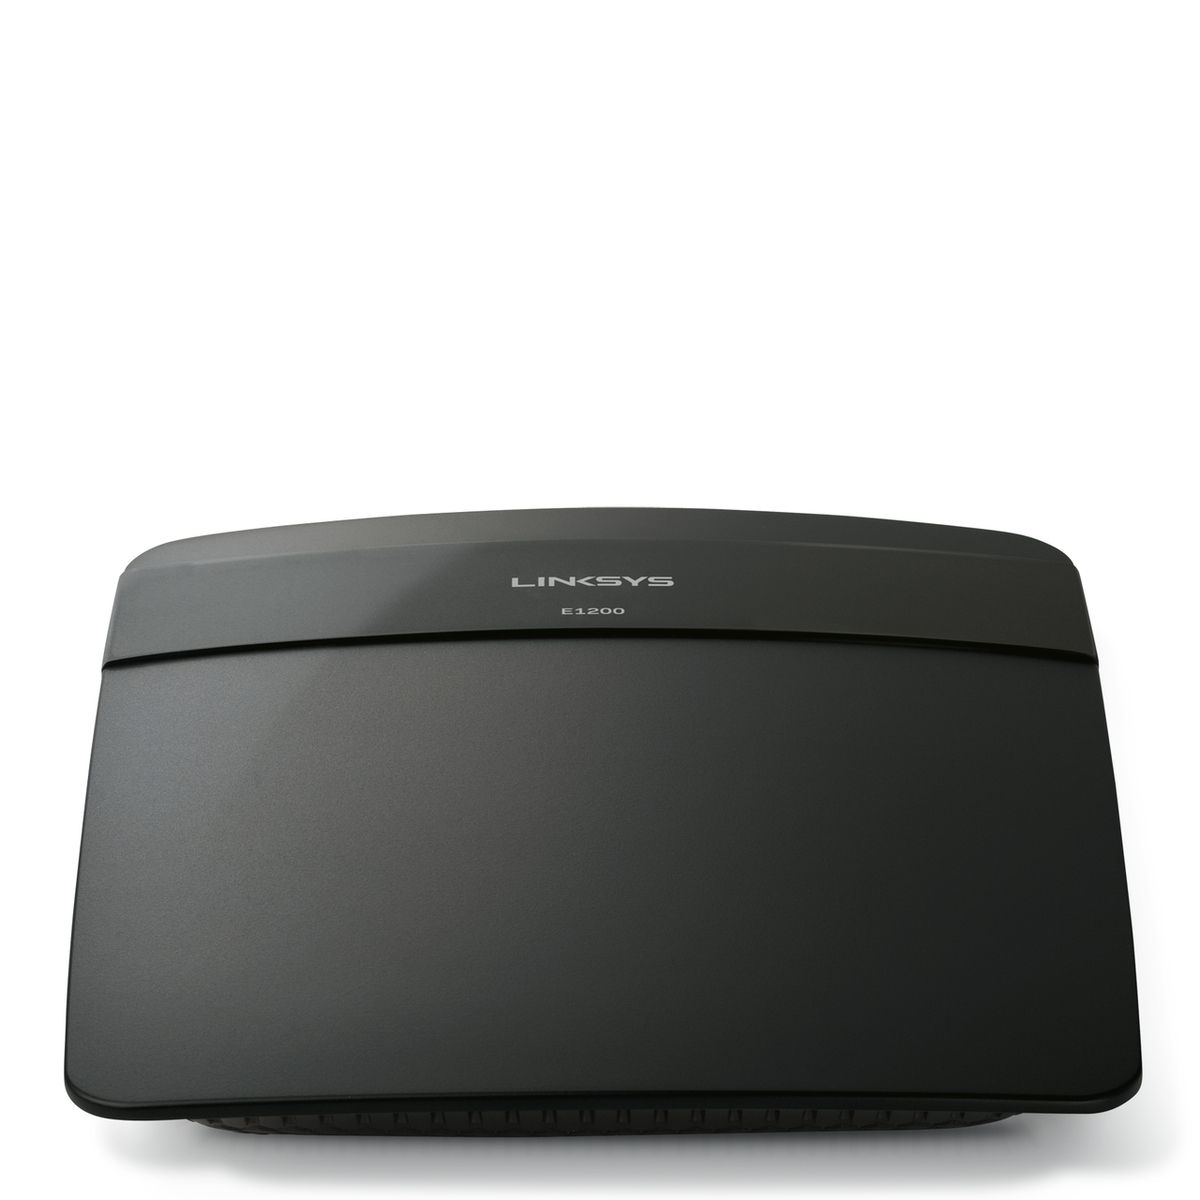 How Do I Find My Passcode For Cisco Linksys E1200 Wireless Router